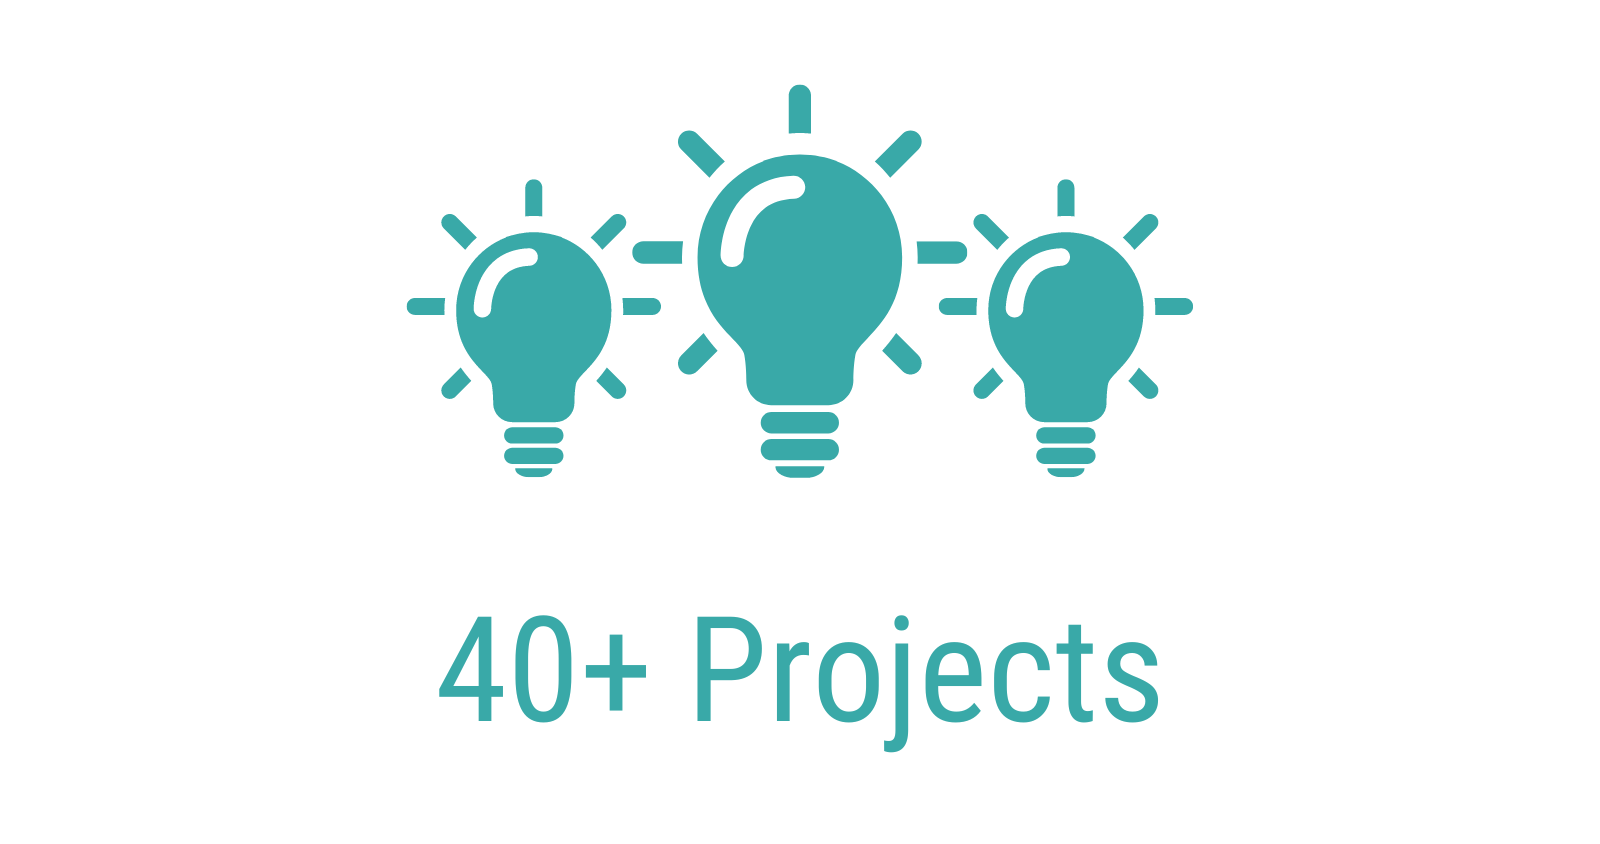 Three lightbulbs with the text "40+ projects" below.